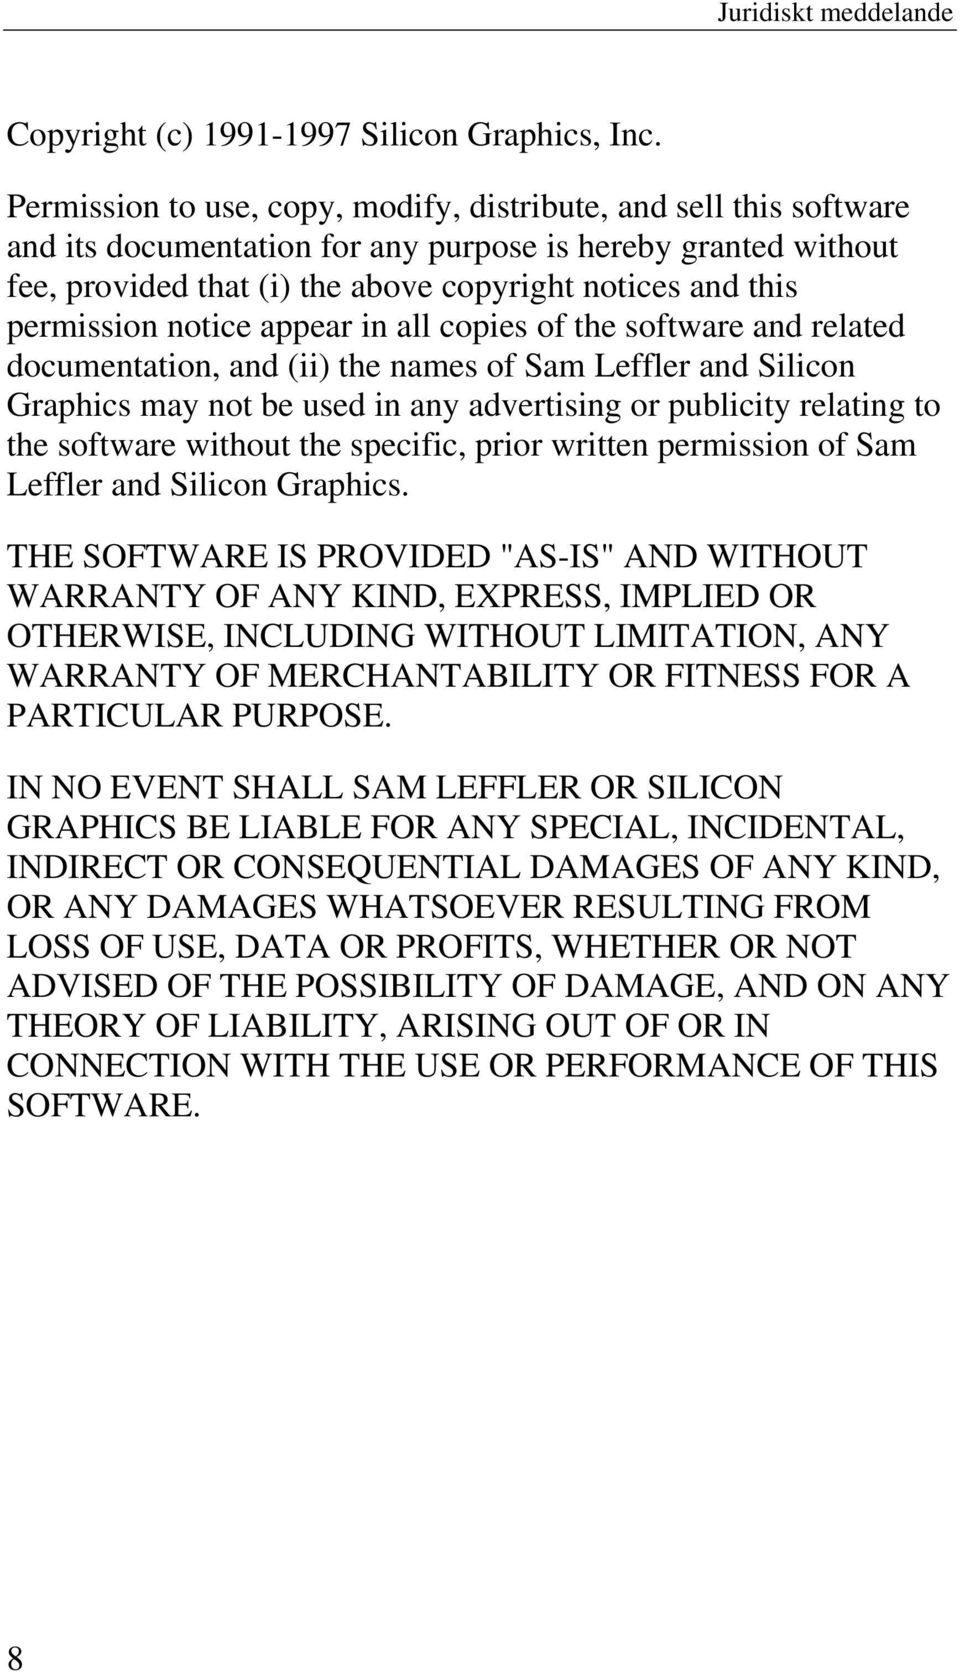 permission notice appear in all copies of the software and related documentation, and (ii) the names of Sam Leffler and Silicon Graphics may not be used in any advertising or publicity relating to